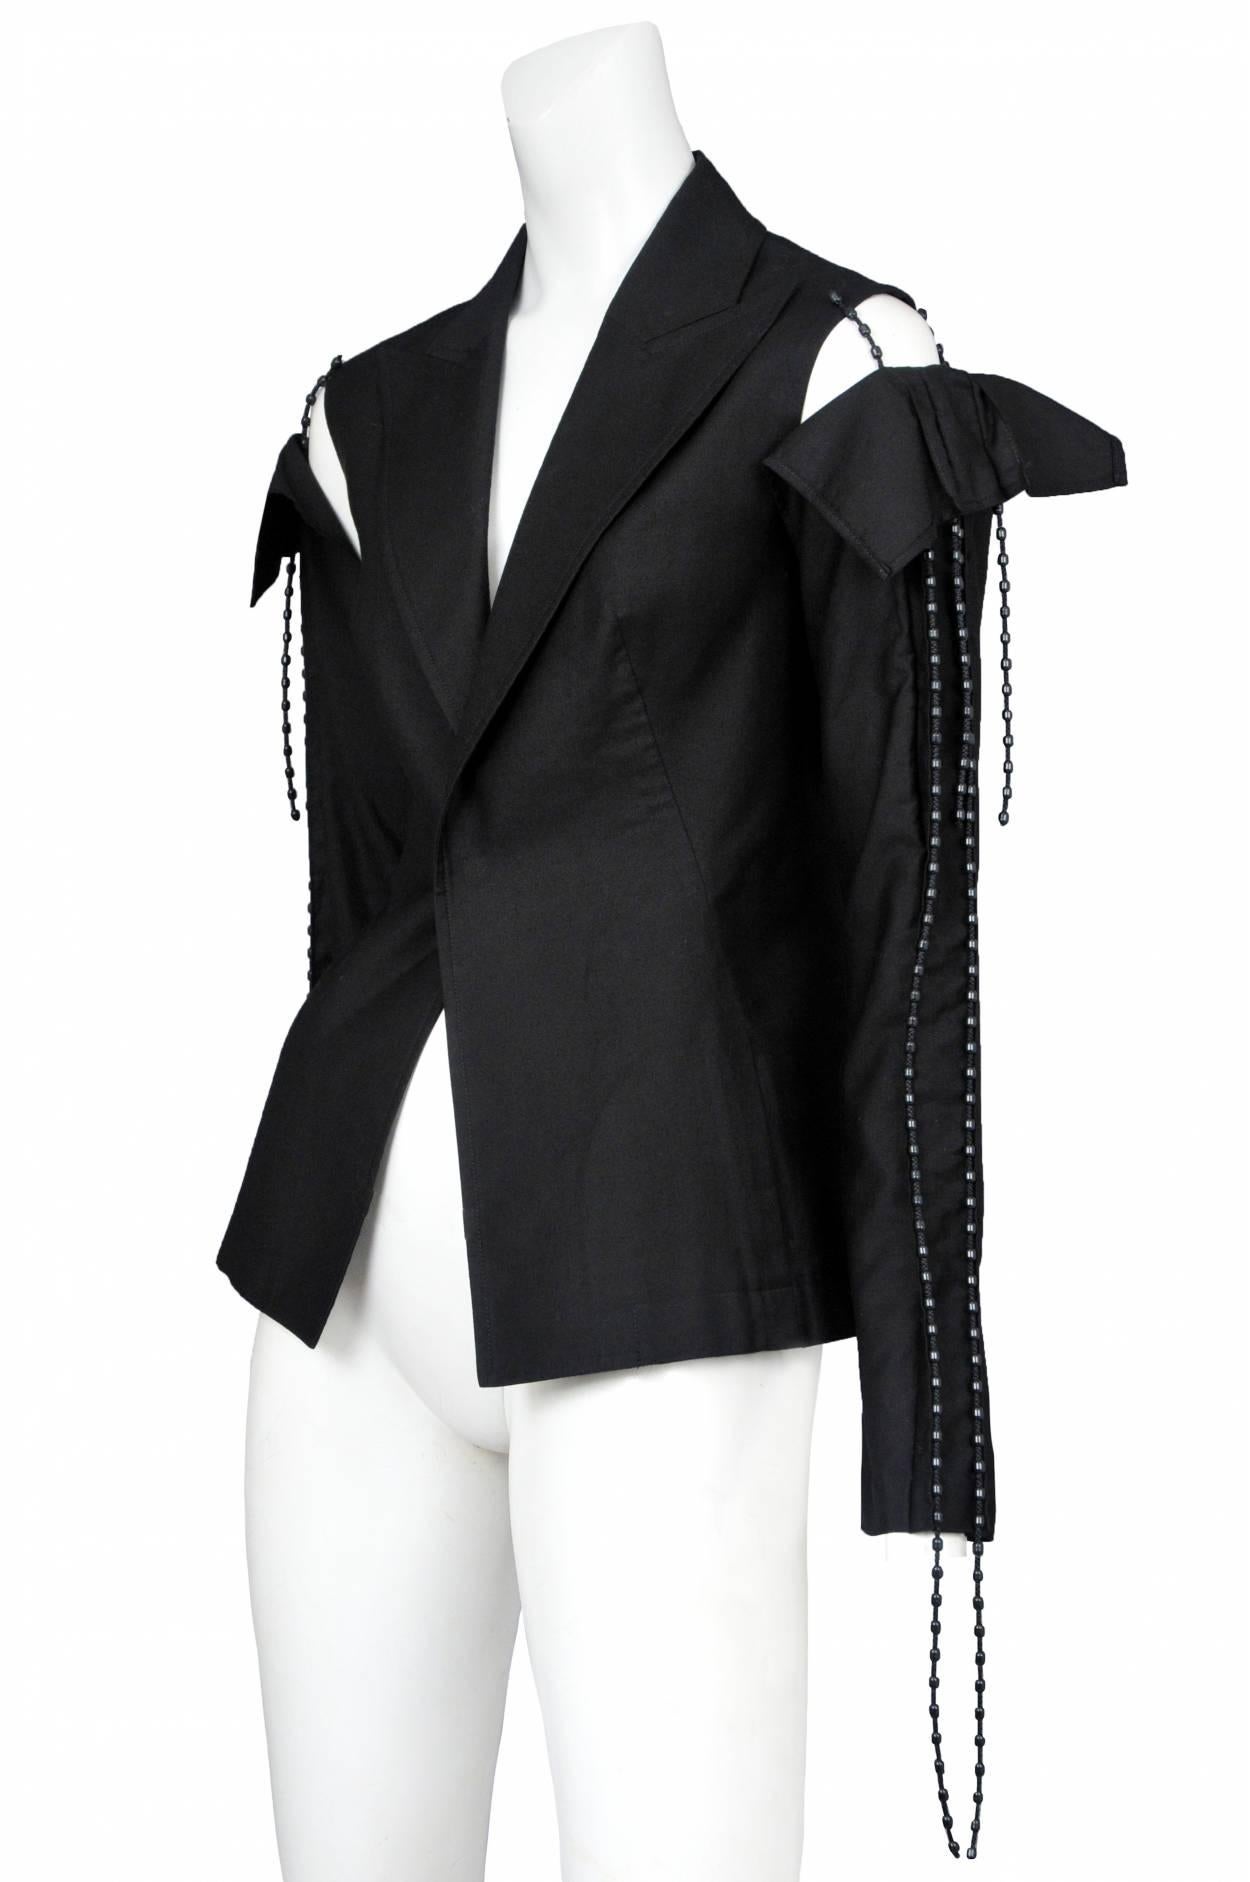 Vintage Yohji Yamamoto black blazer featuring a pointed collar, detached shoulder seams and beaded trim that hangs from the shoulders and sleeves. Runway piece from the Spring/Summer 2014 Collection.